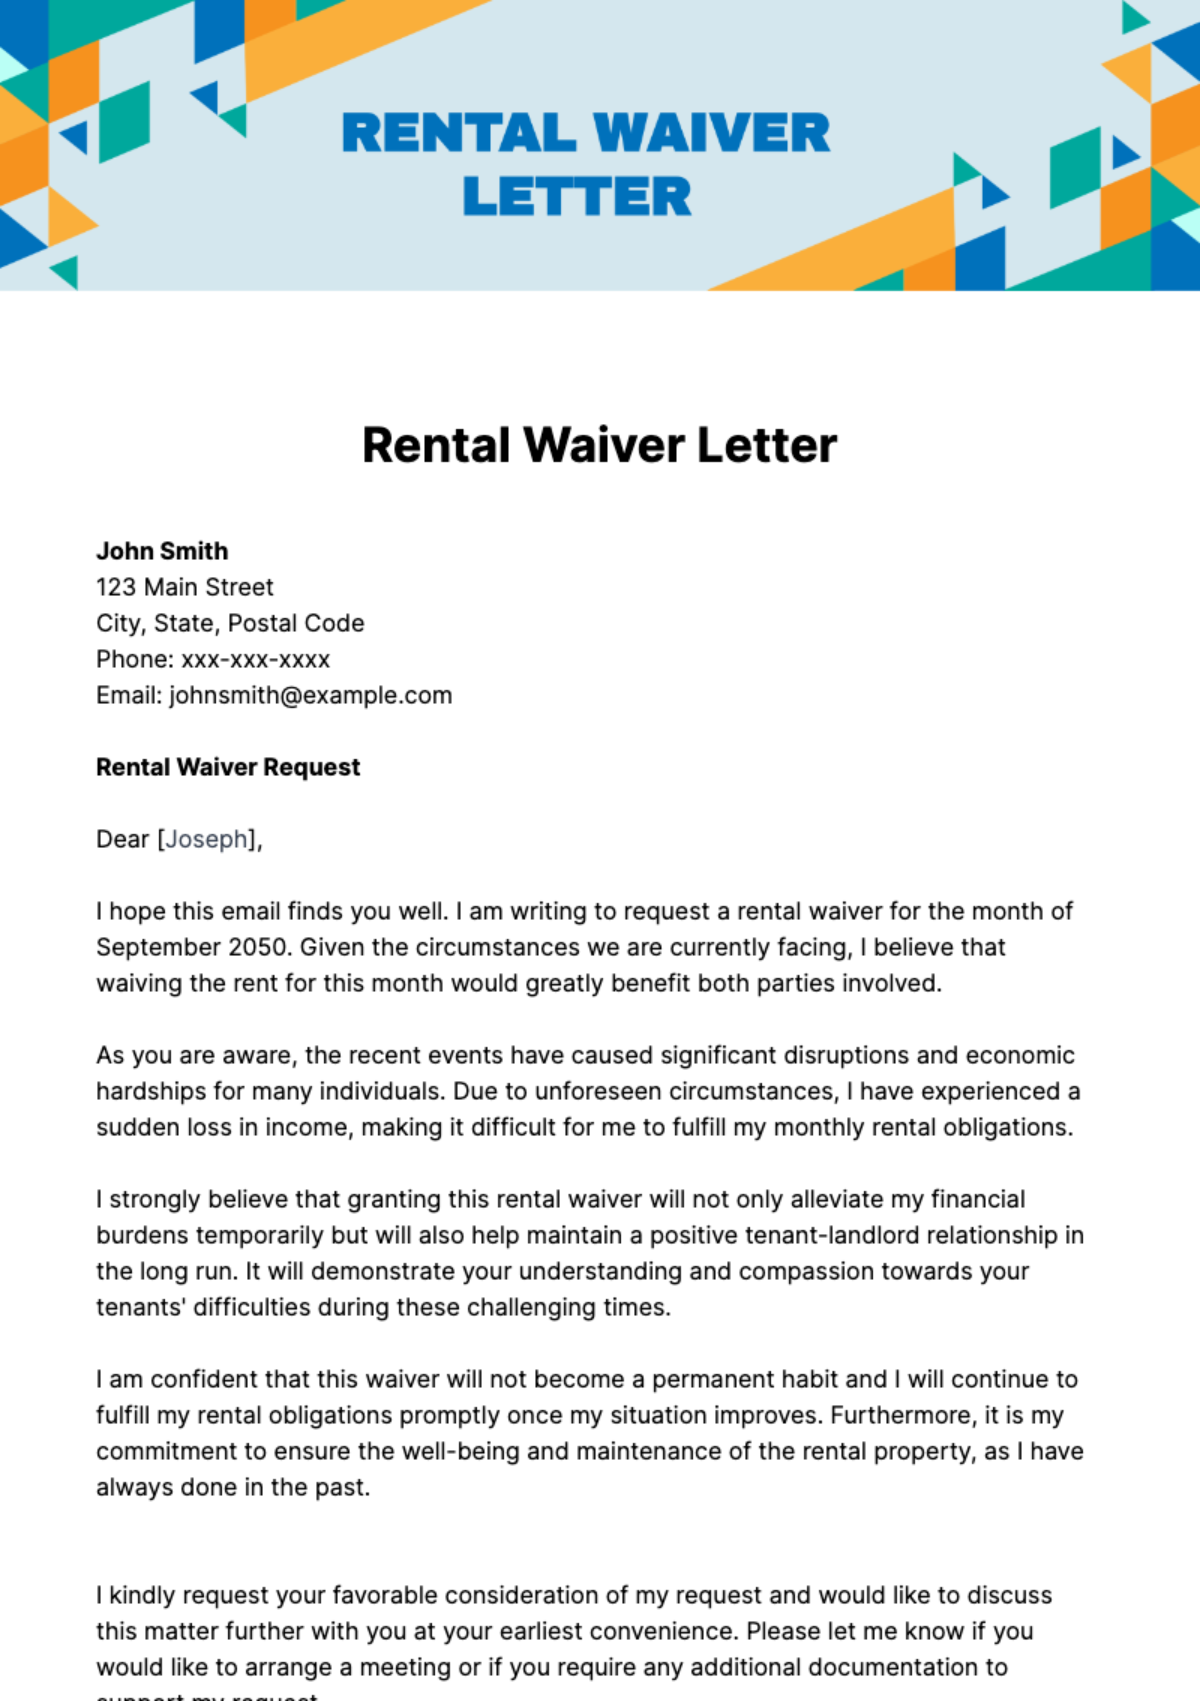 Free Rental Waiver Letter Template